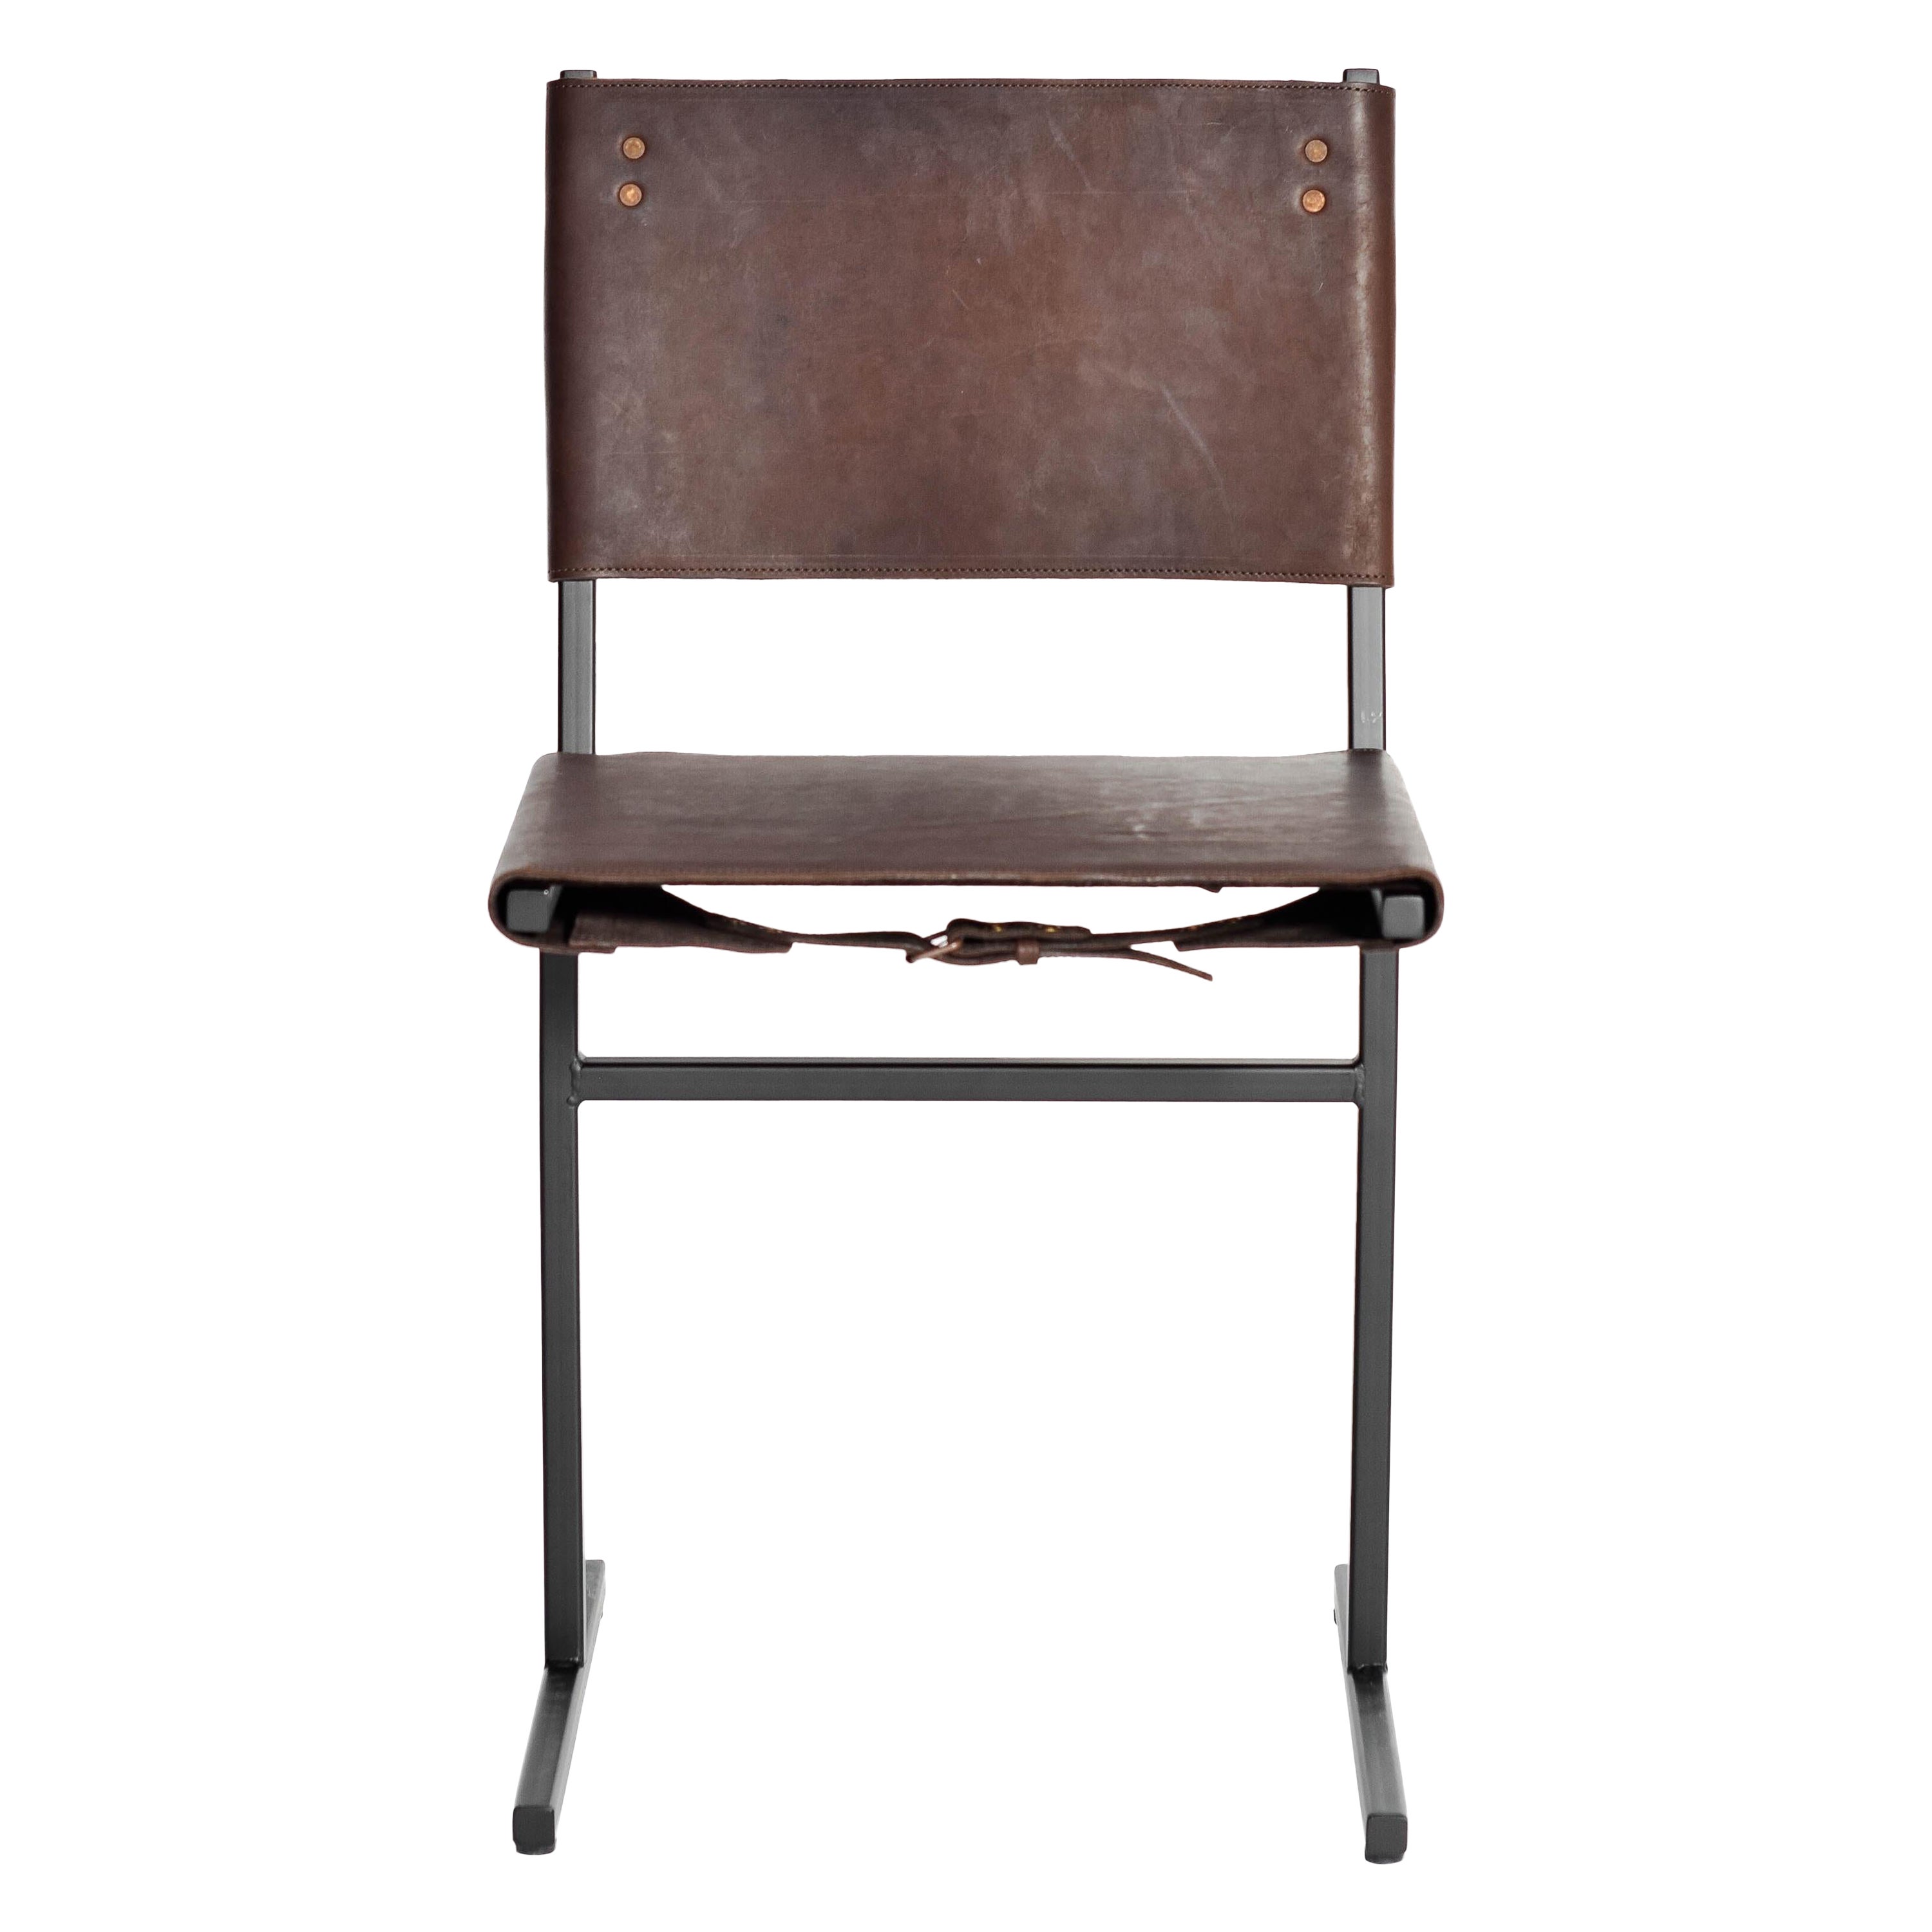 Chocolate and Black Memento Chair, Jesse Sanderson For Sale